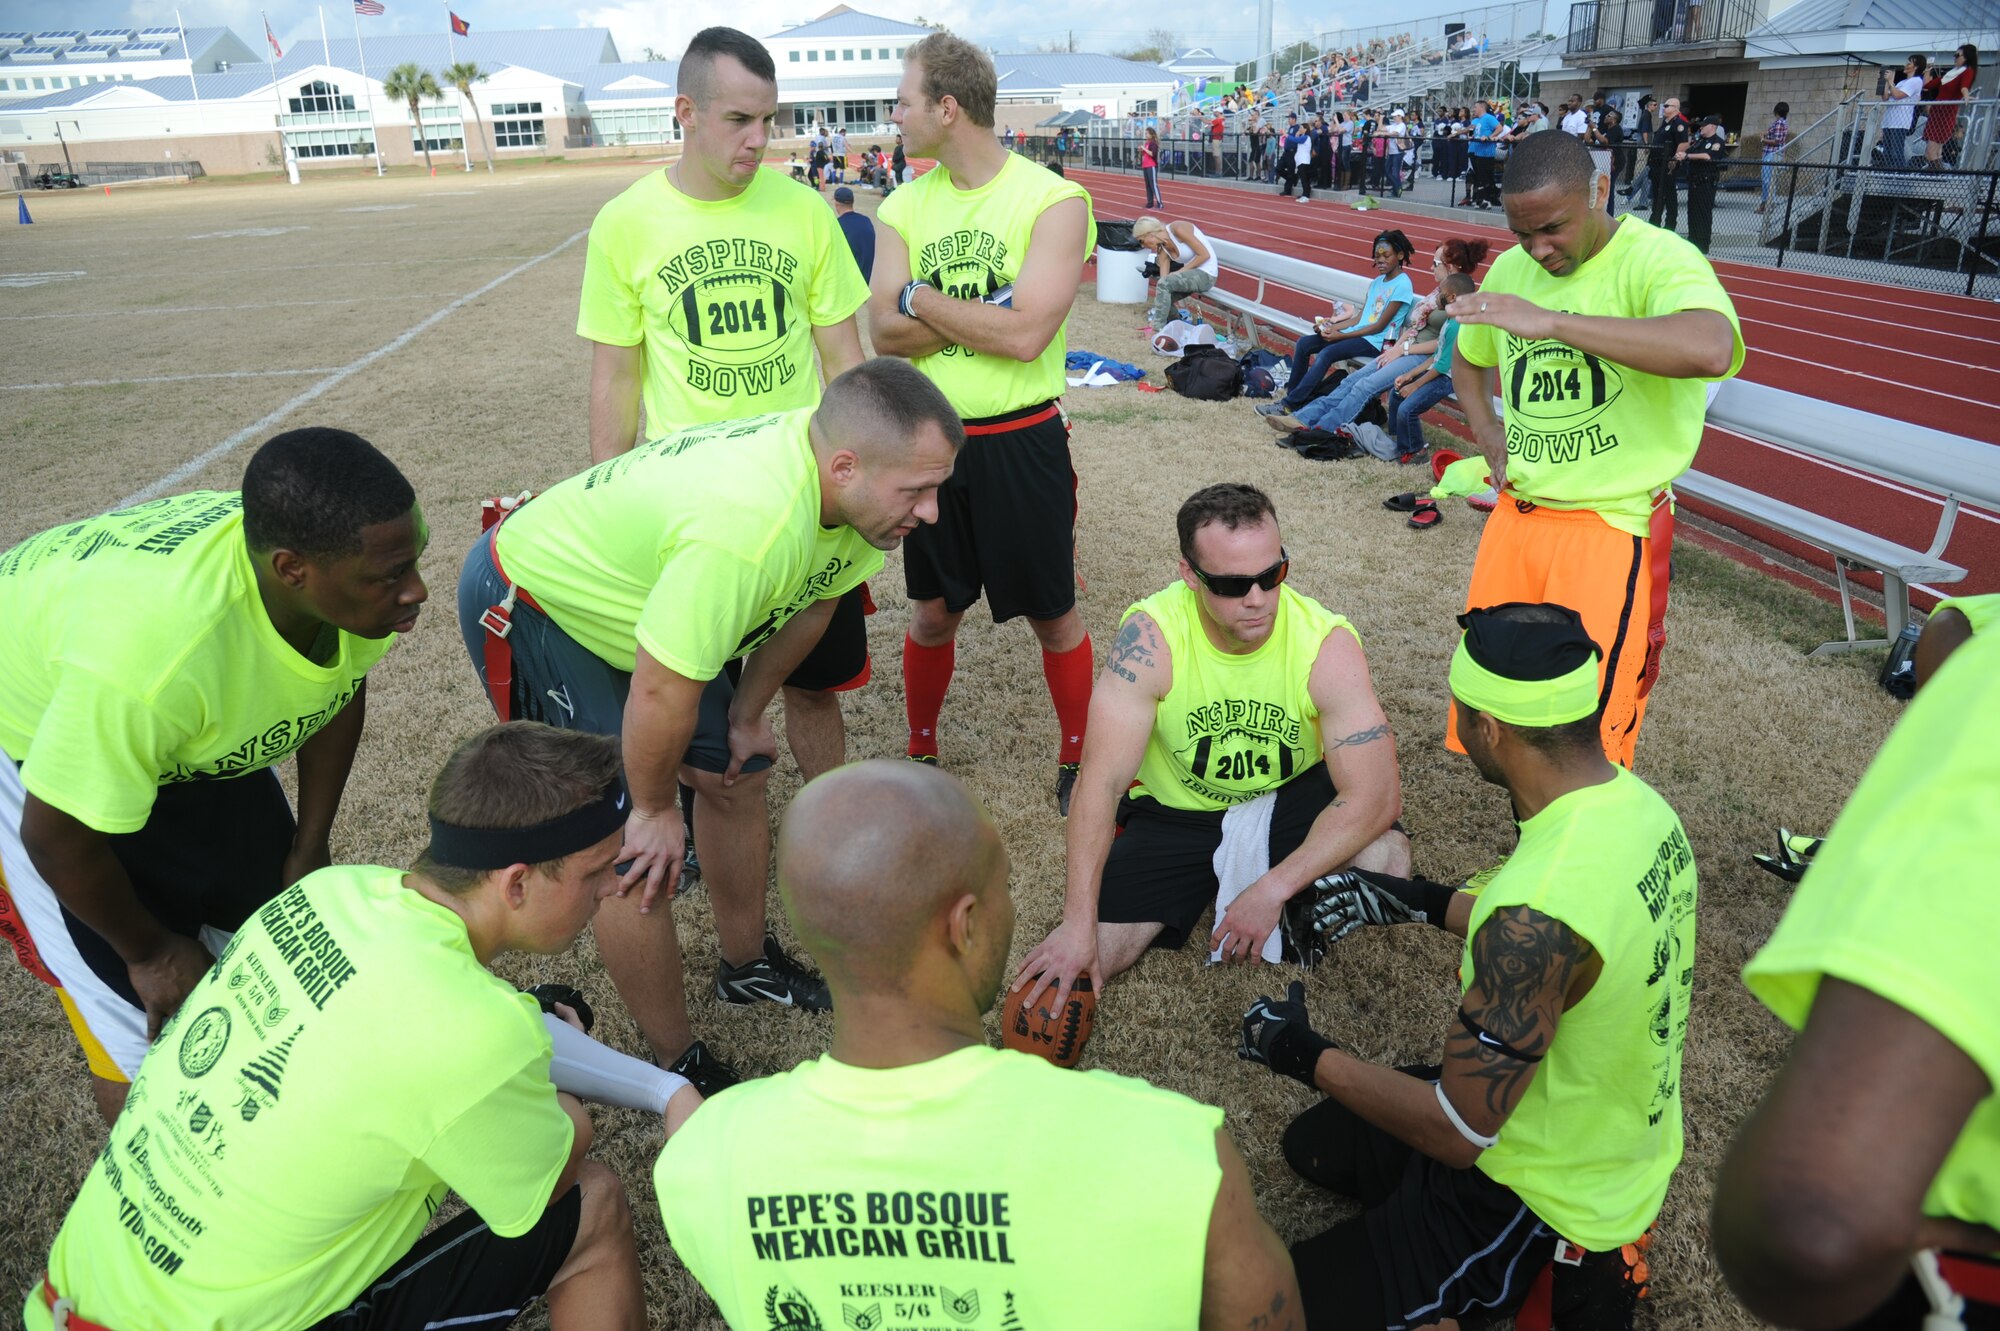 The Joint Branch team discusses game strategies during half time against the Mississippi Gulf Coast team during the Nspire Bowl Dec. 6, 2014, at the Salvation Army Kroc Center, Biloxi, Miss.  The Nspire Bowl is a charity event that included two flag-football games with teams made up of military personnel and civilians from local communities.  All donations and profits from the event will be used to purchase gifts for the Salvation Army Angel Tree program. (U.S. Air Force photo by Kemberly Groue)